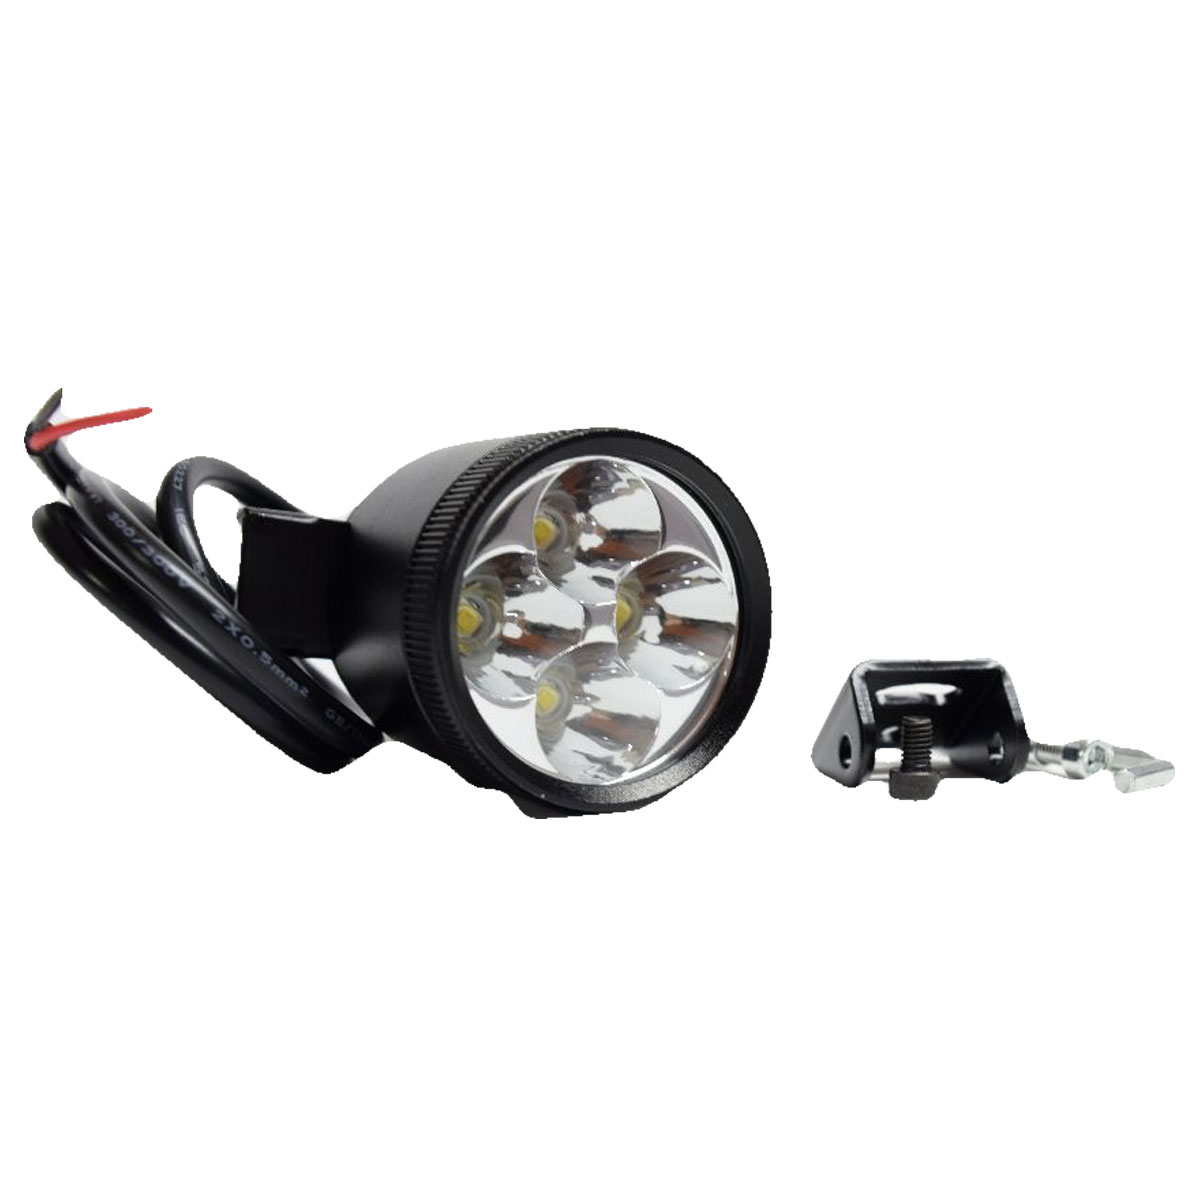 Wholesale faros auxiliares led para motos That Are Simple And Effective 